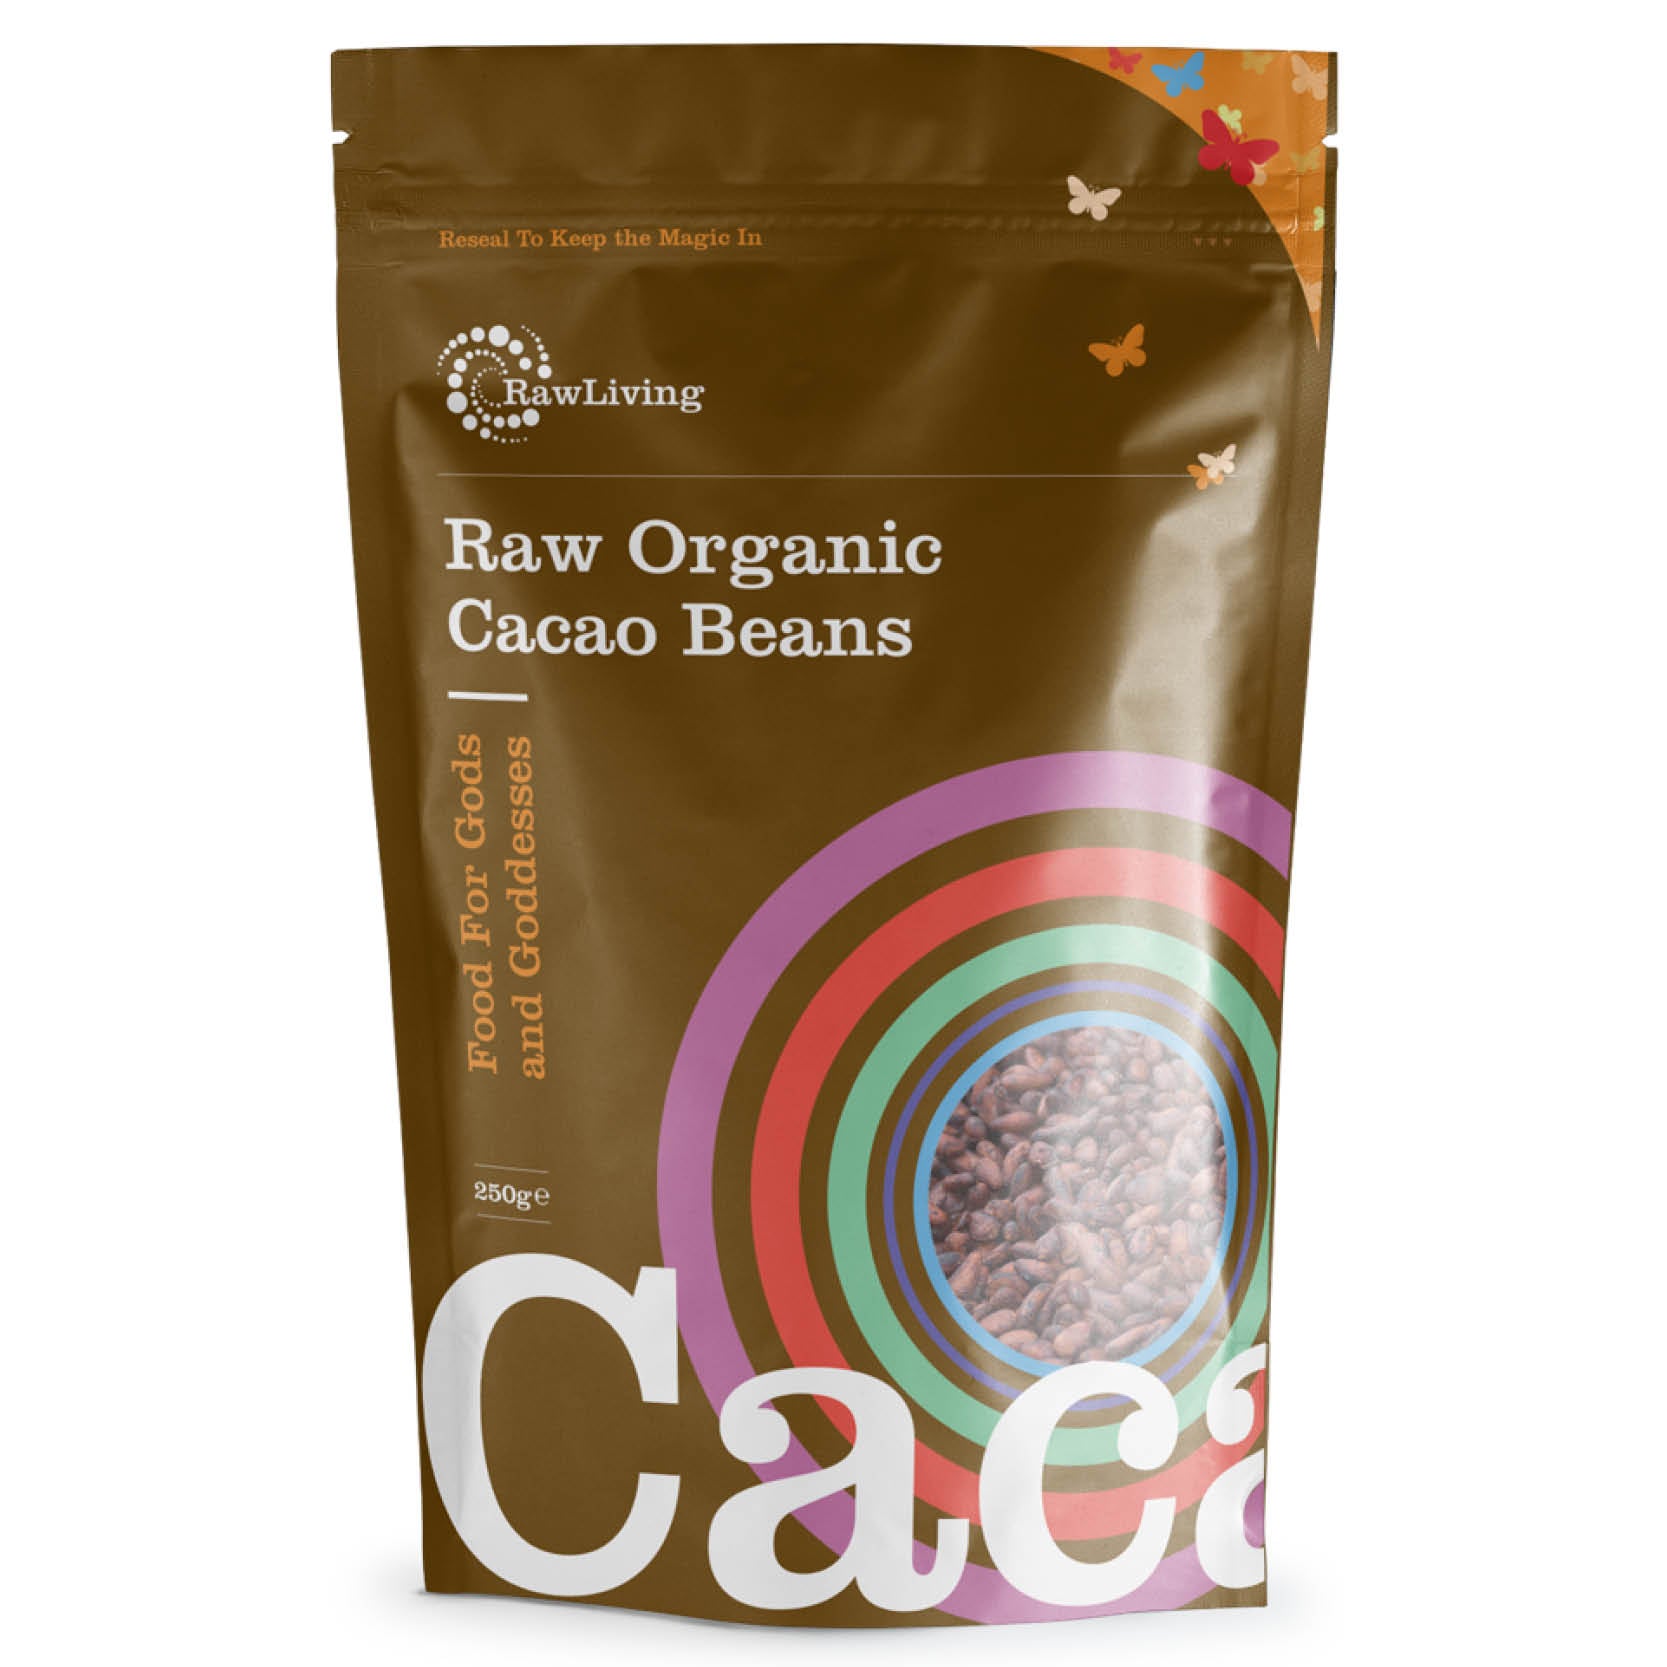 Raw Living Cacao Products